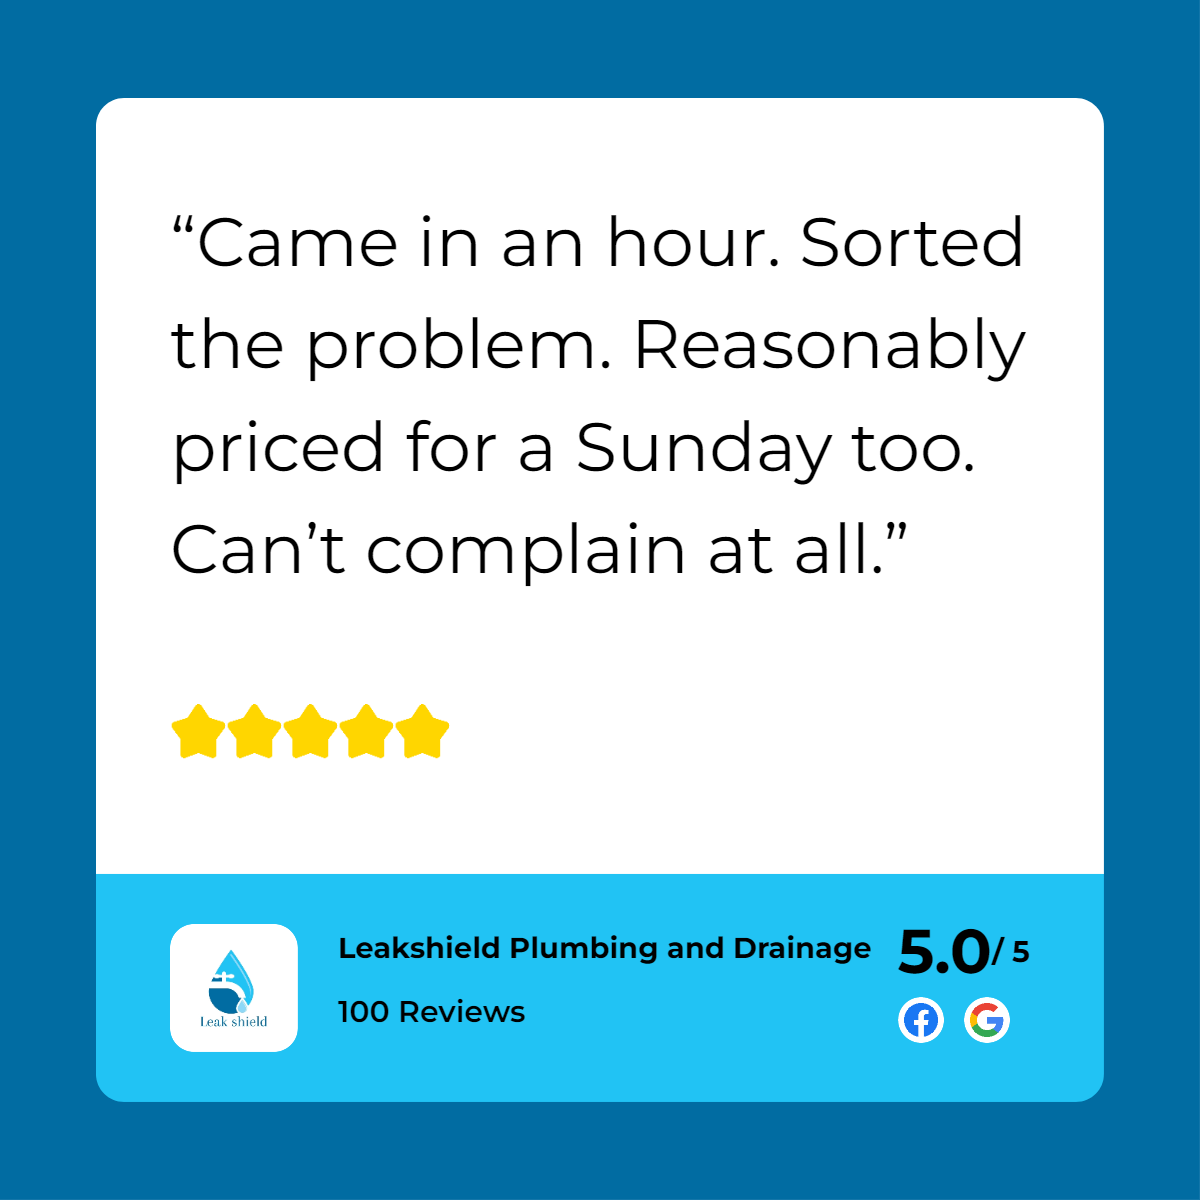 A customer review for leeds plumbing.